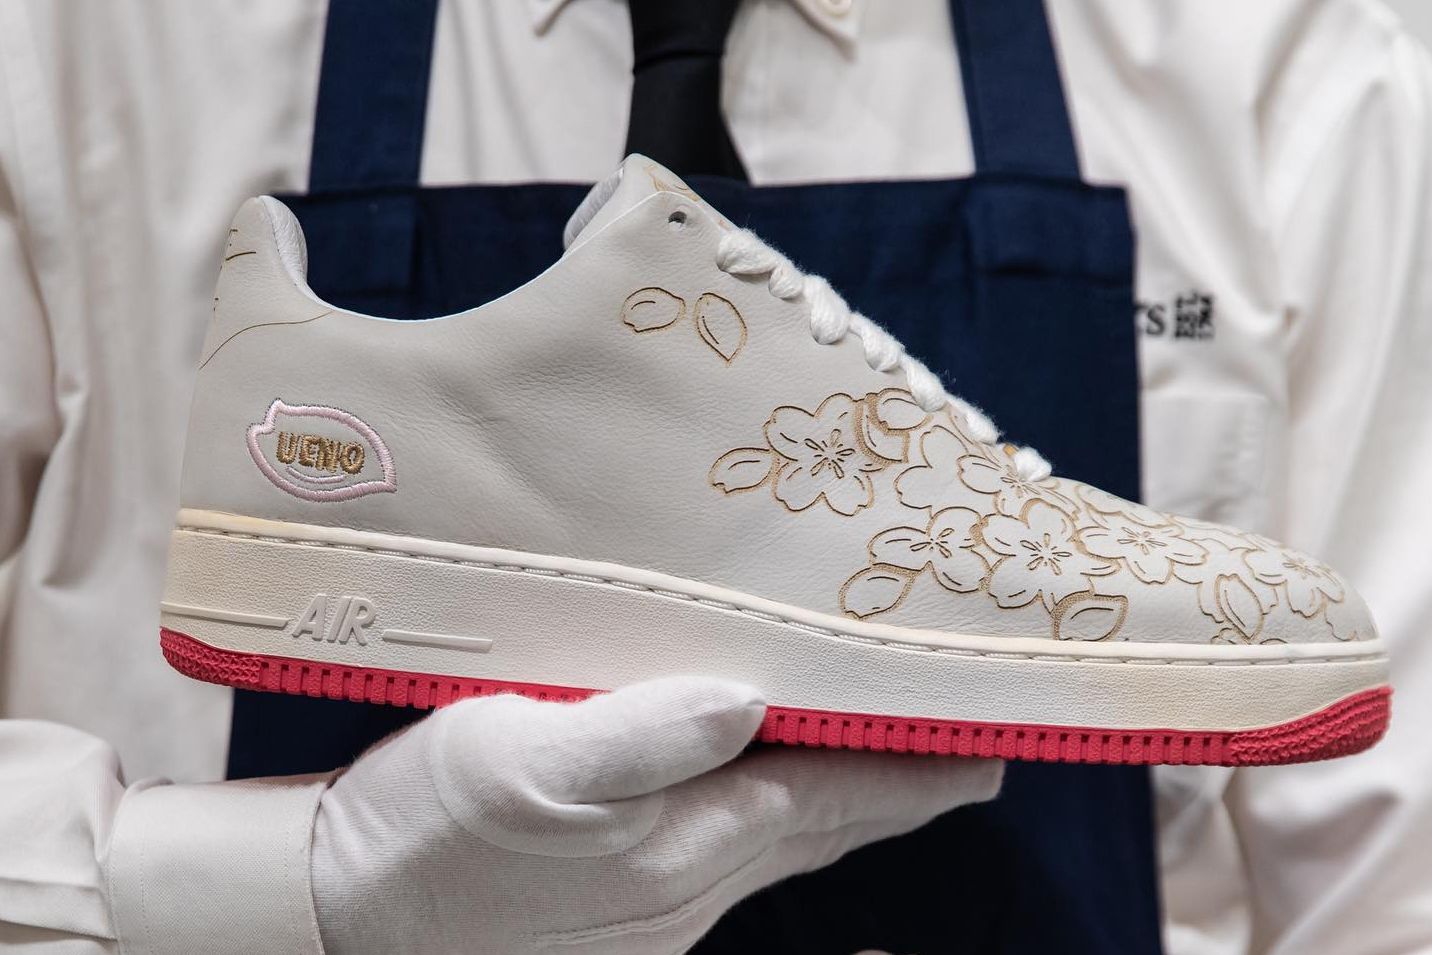 Sotheby's '40 for 40' Auction Offers Up 40 Ultra-Rare Nike Air Force 1s -  Sneaker Freaker